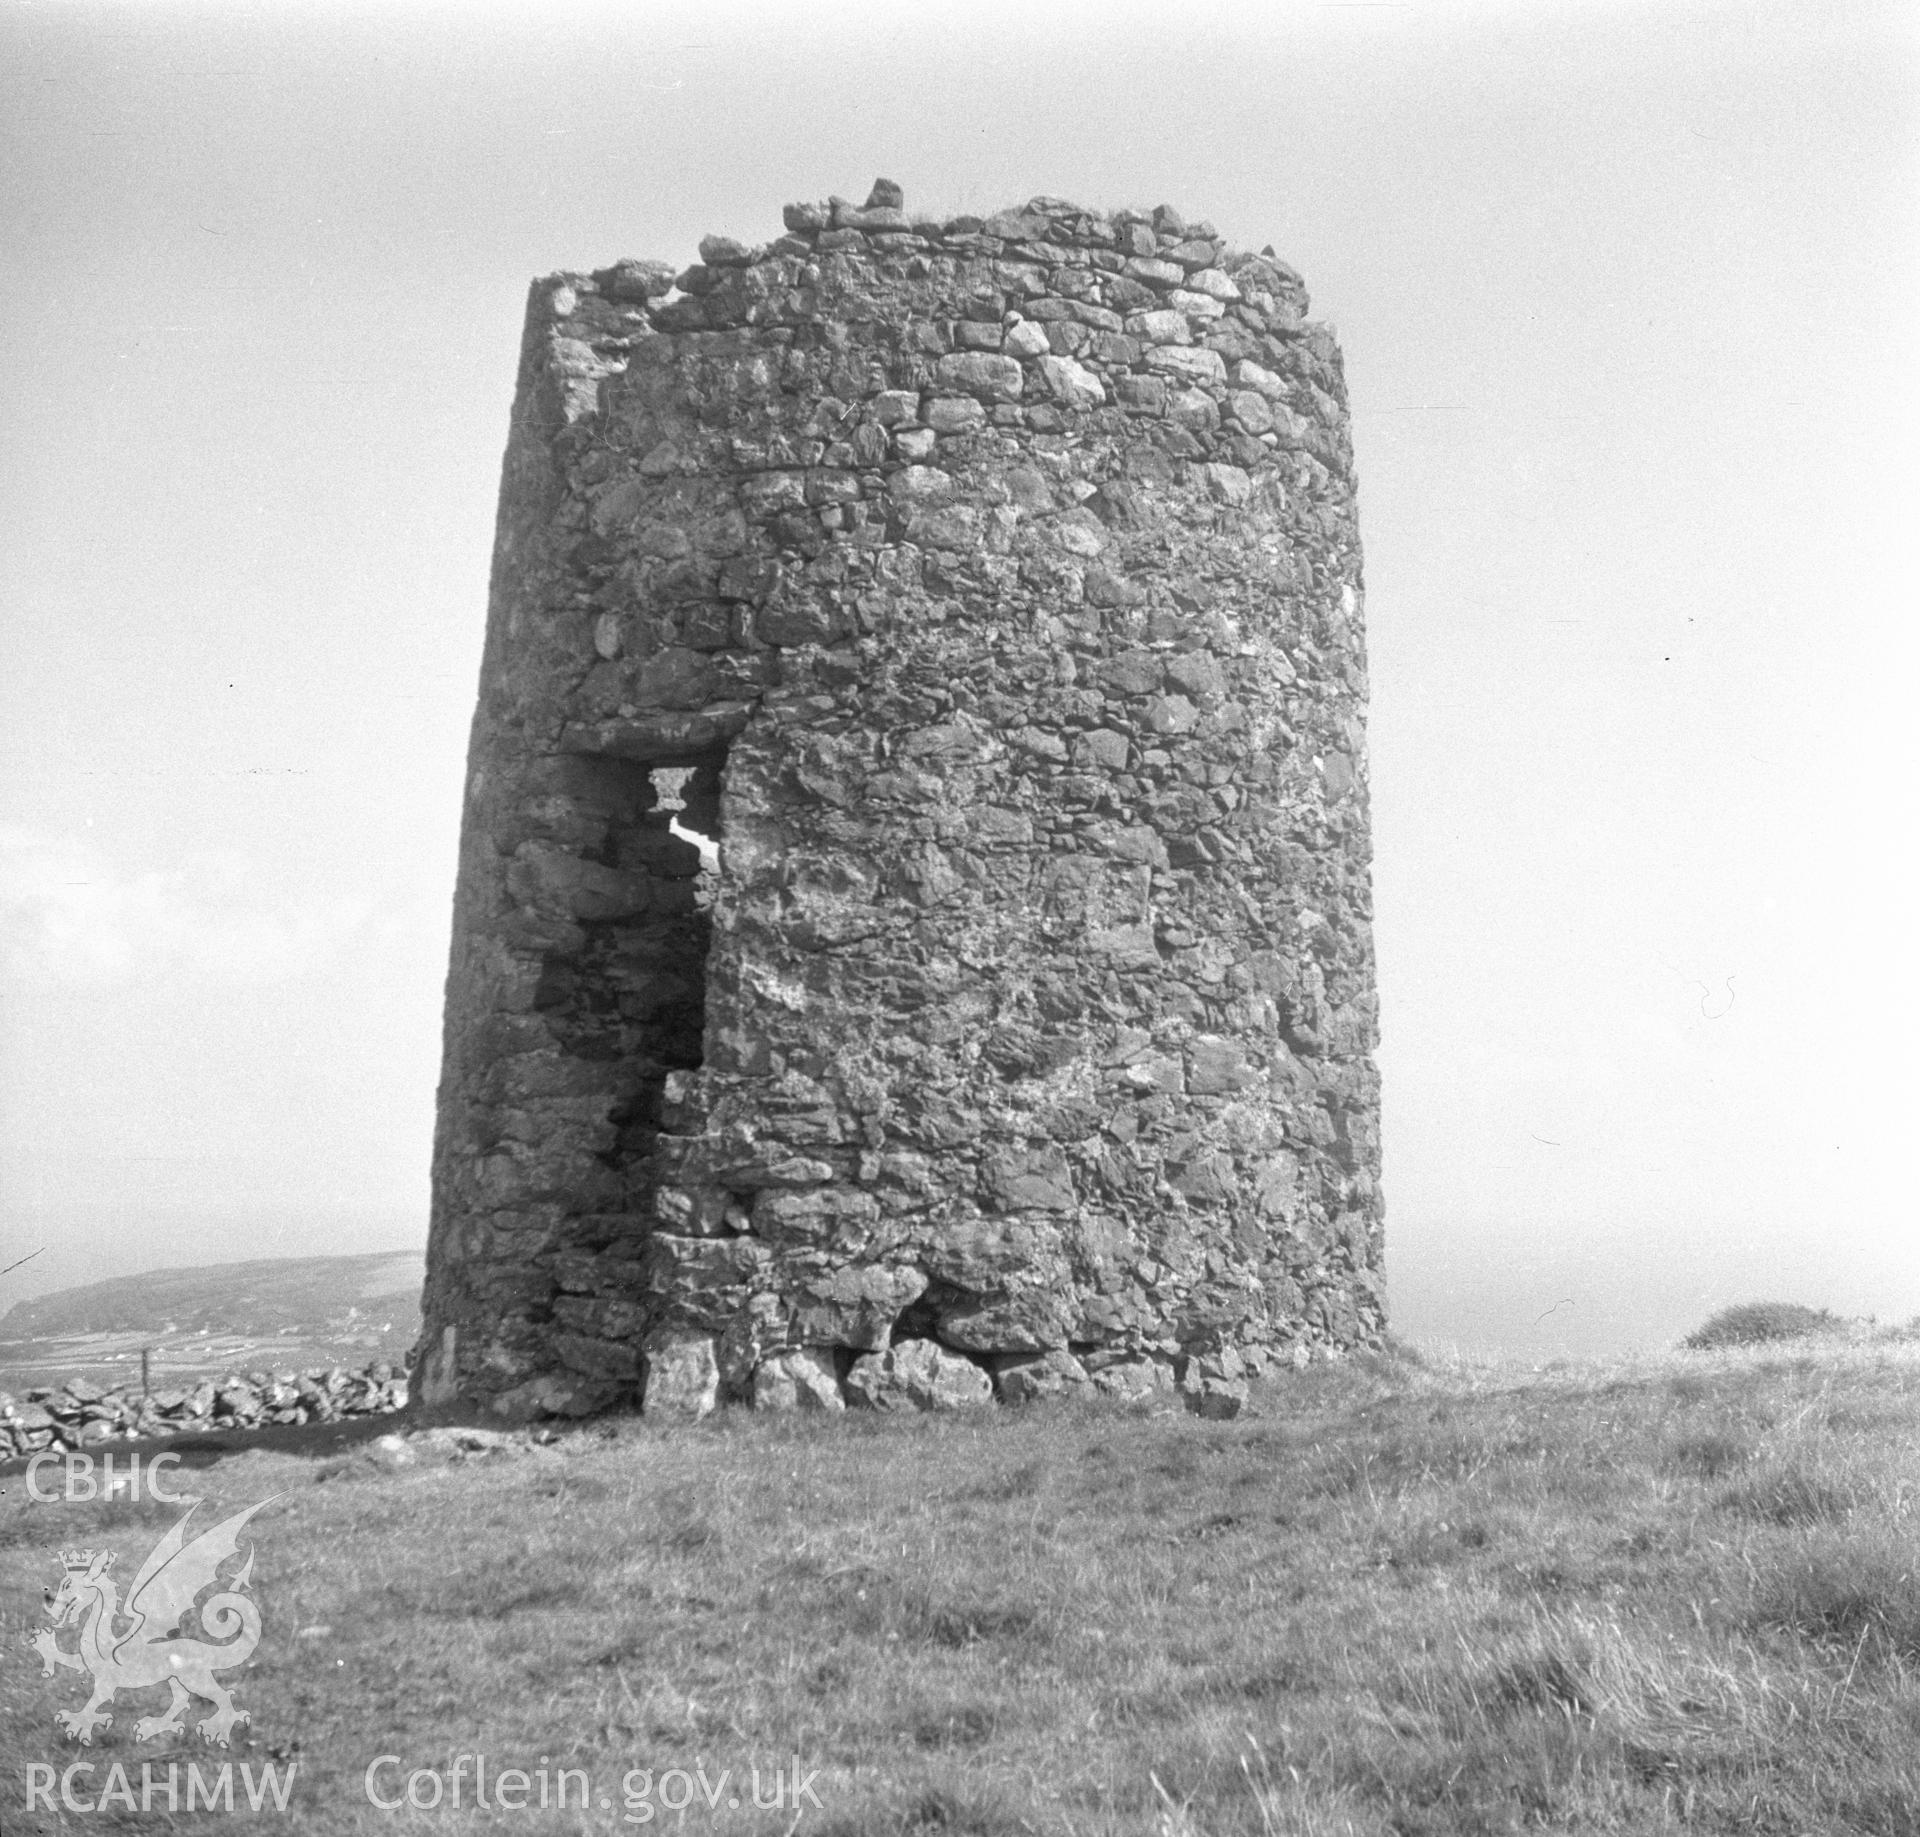 Digital copy of a nitrate negative showing view of Tretower, Breconshire.